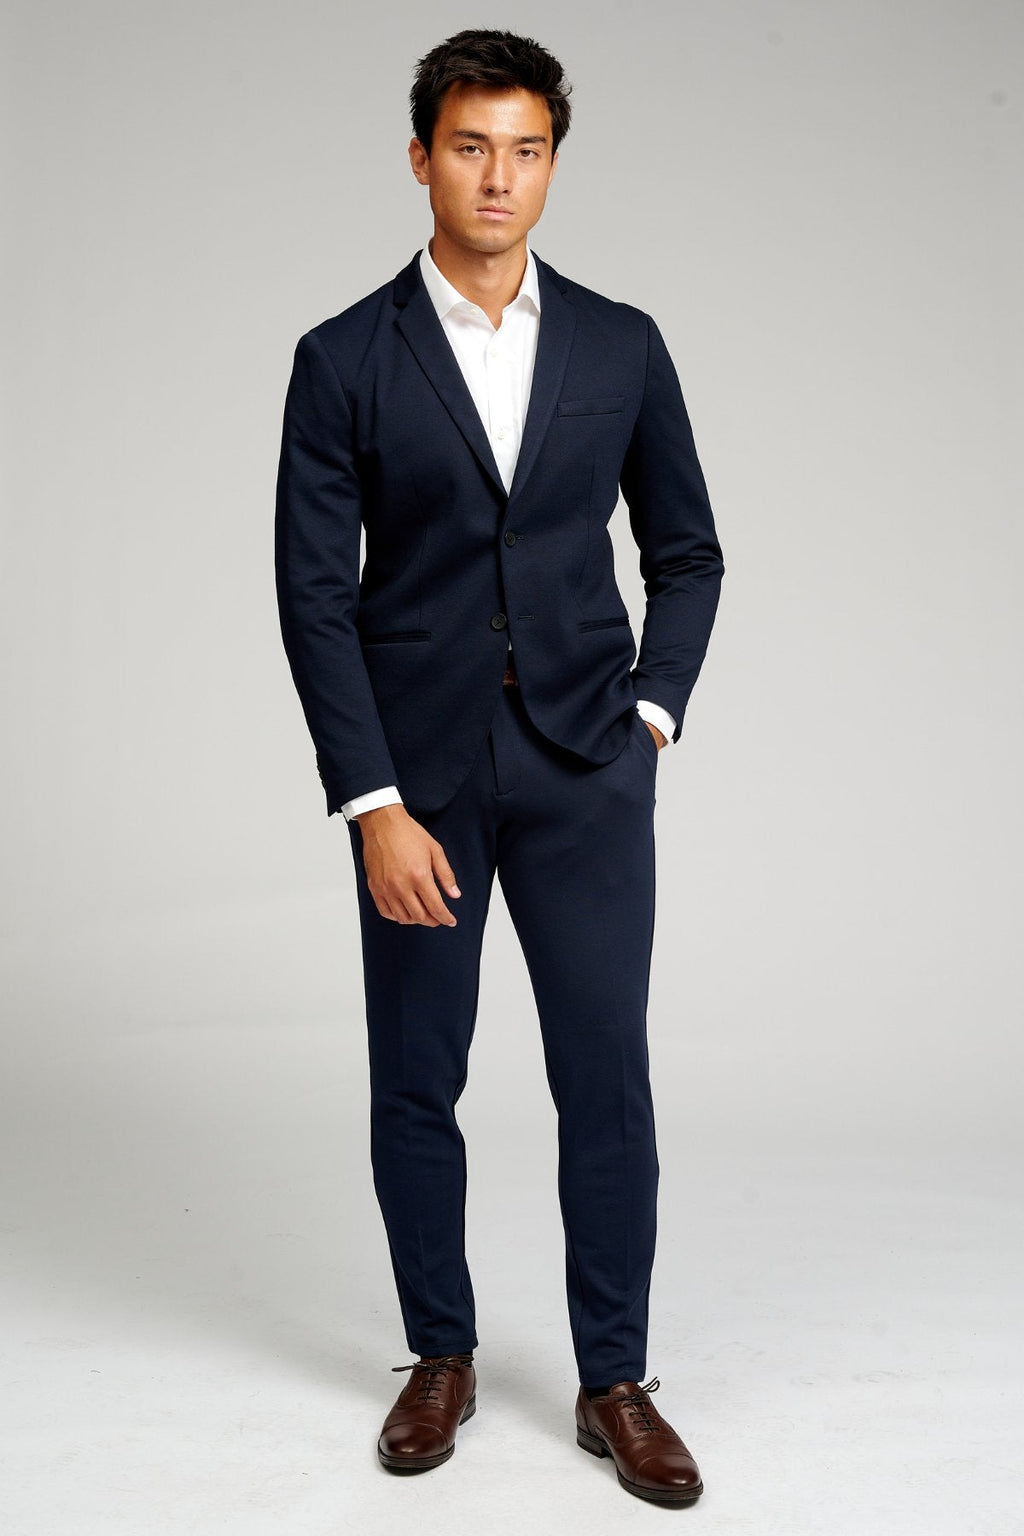 The Original Performance Suit™️ (Navy) + Tie - Package Deal (V.I.P)